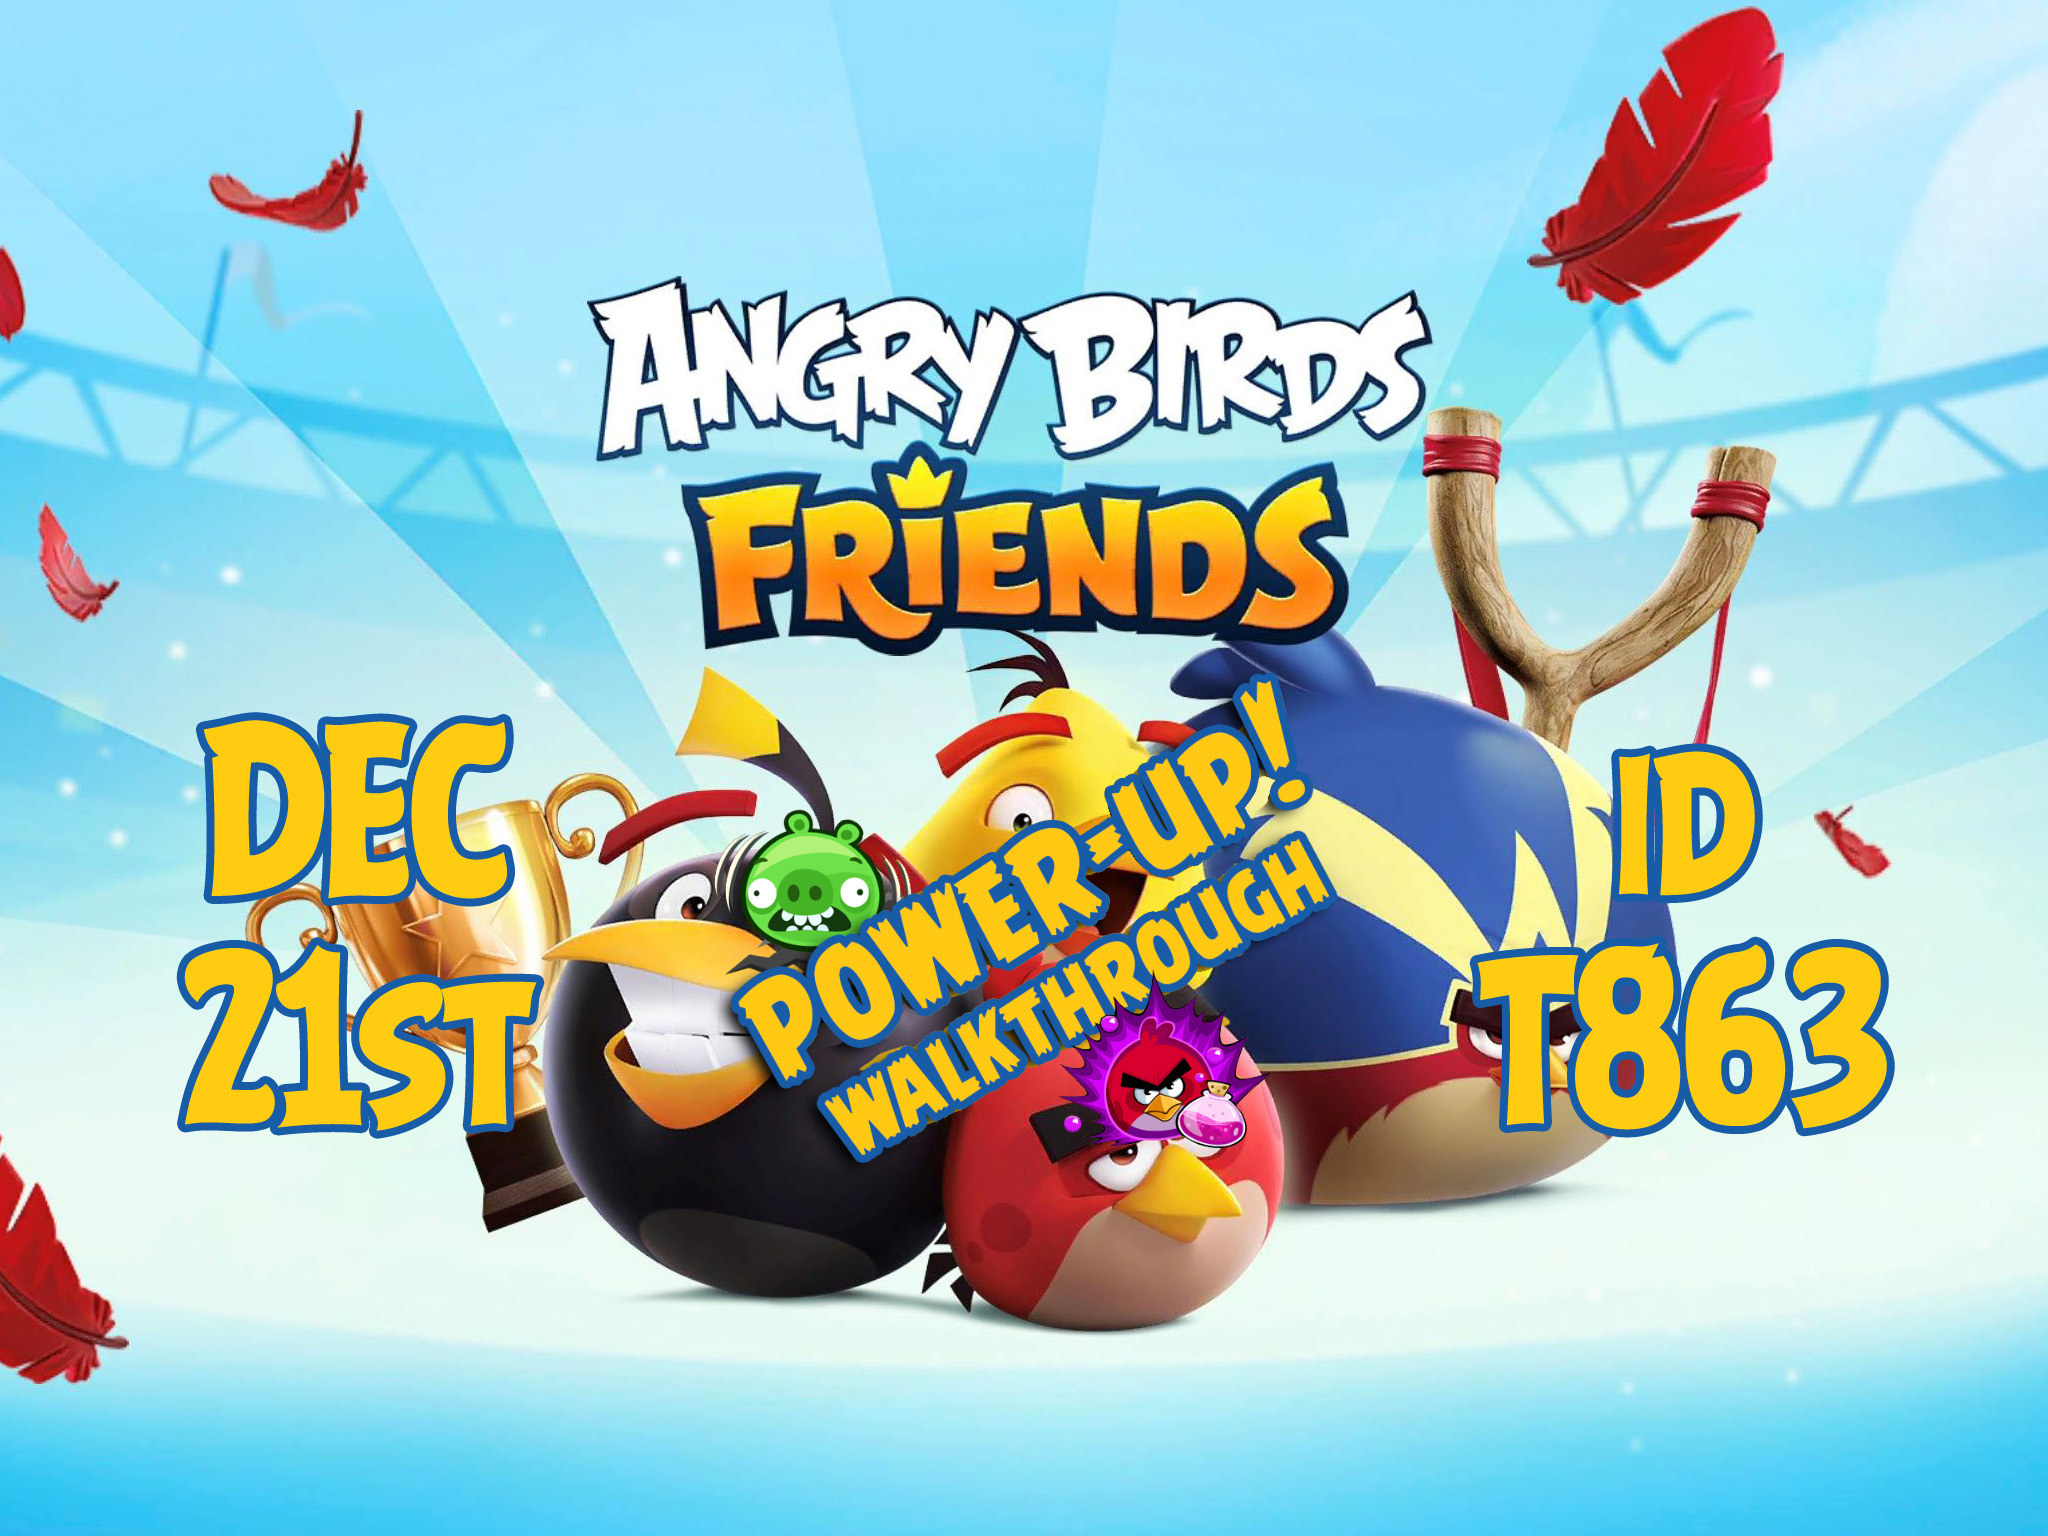 Angry-Birds-Friends-Tournament-T863-Feature-Image-PU